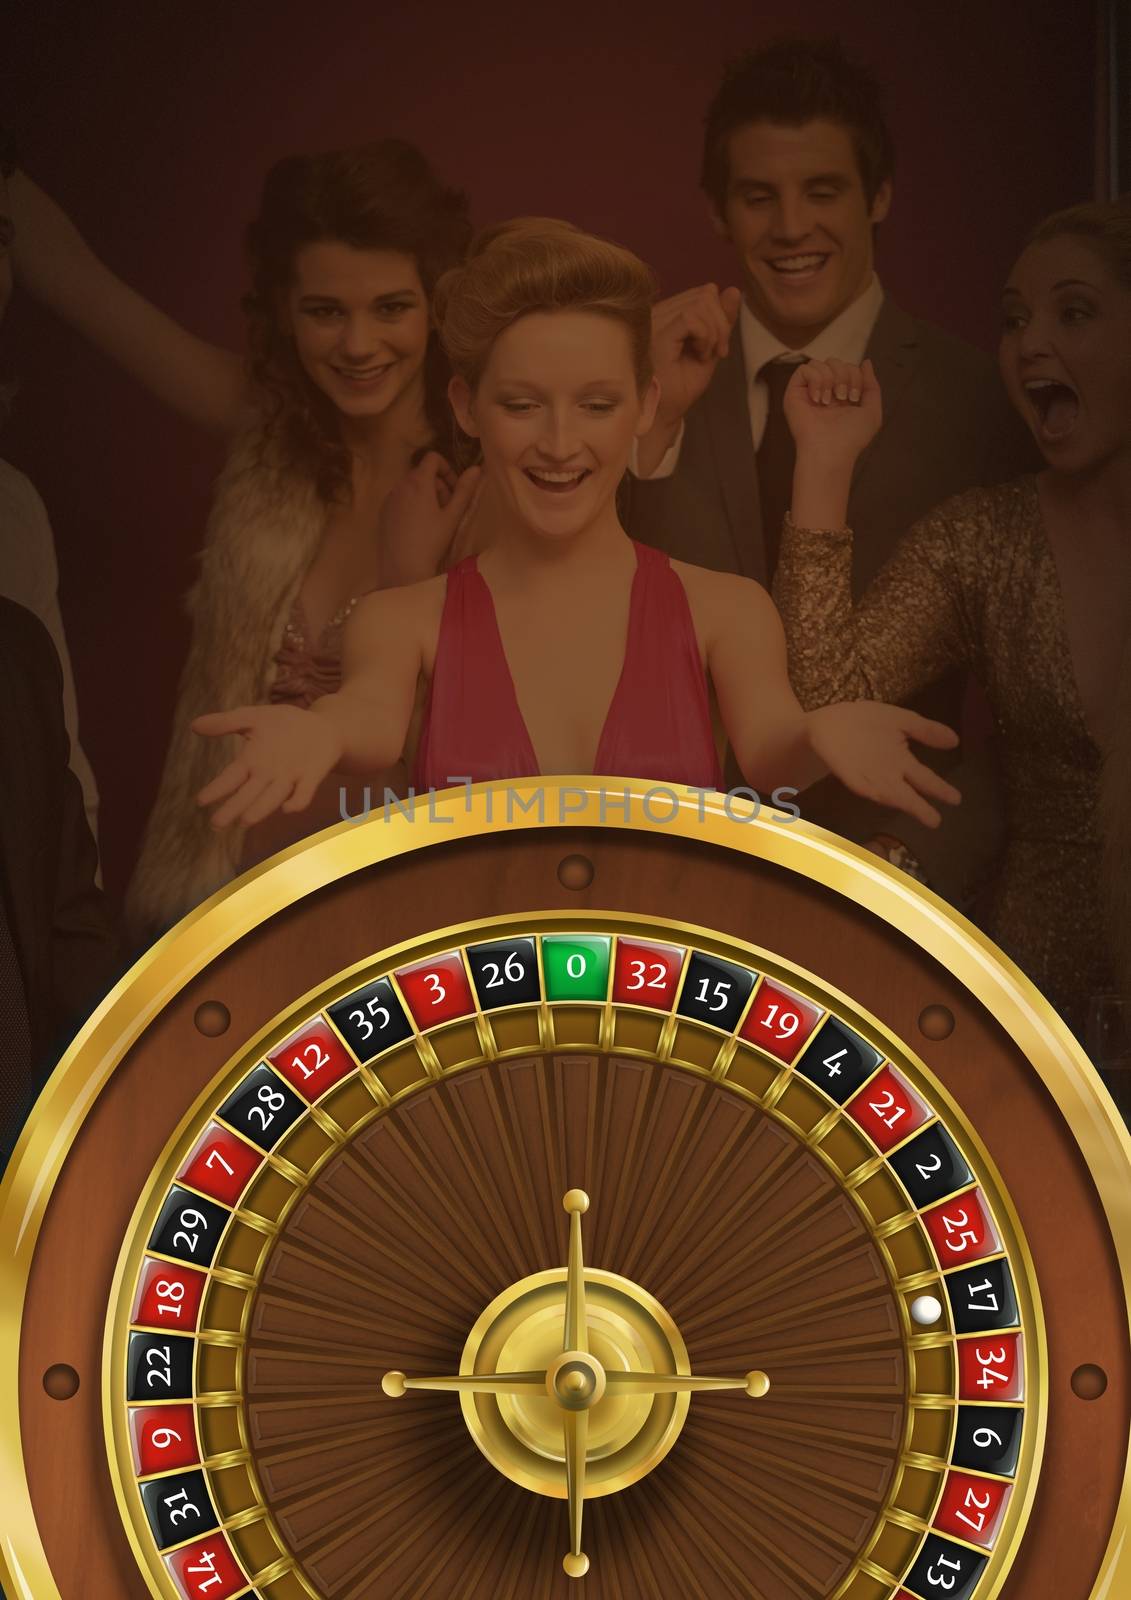 Roulette wheel and people having fun in background by Wavebreakmedia